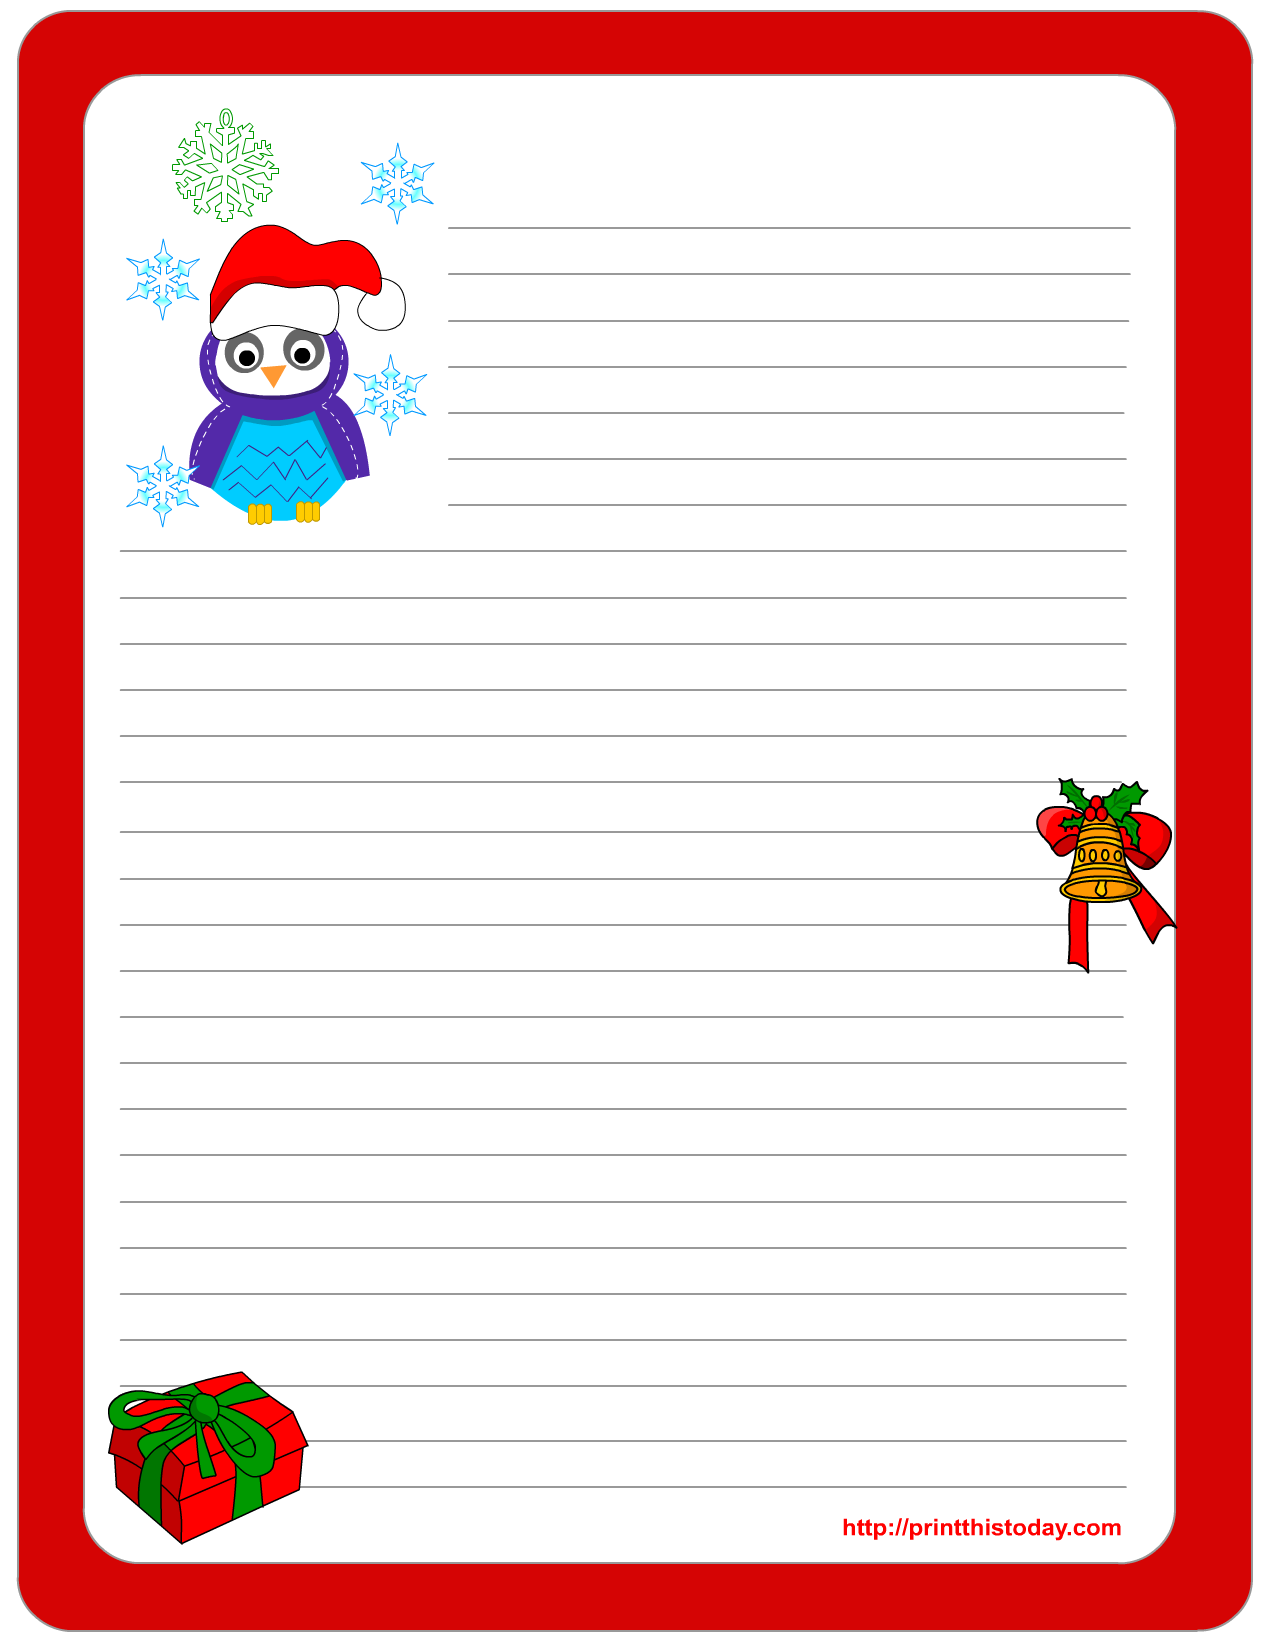 5-best-images-of-free-owl-printable-christmas-stationery-free